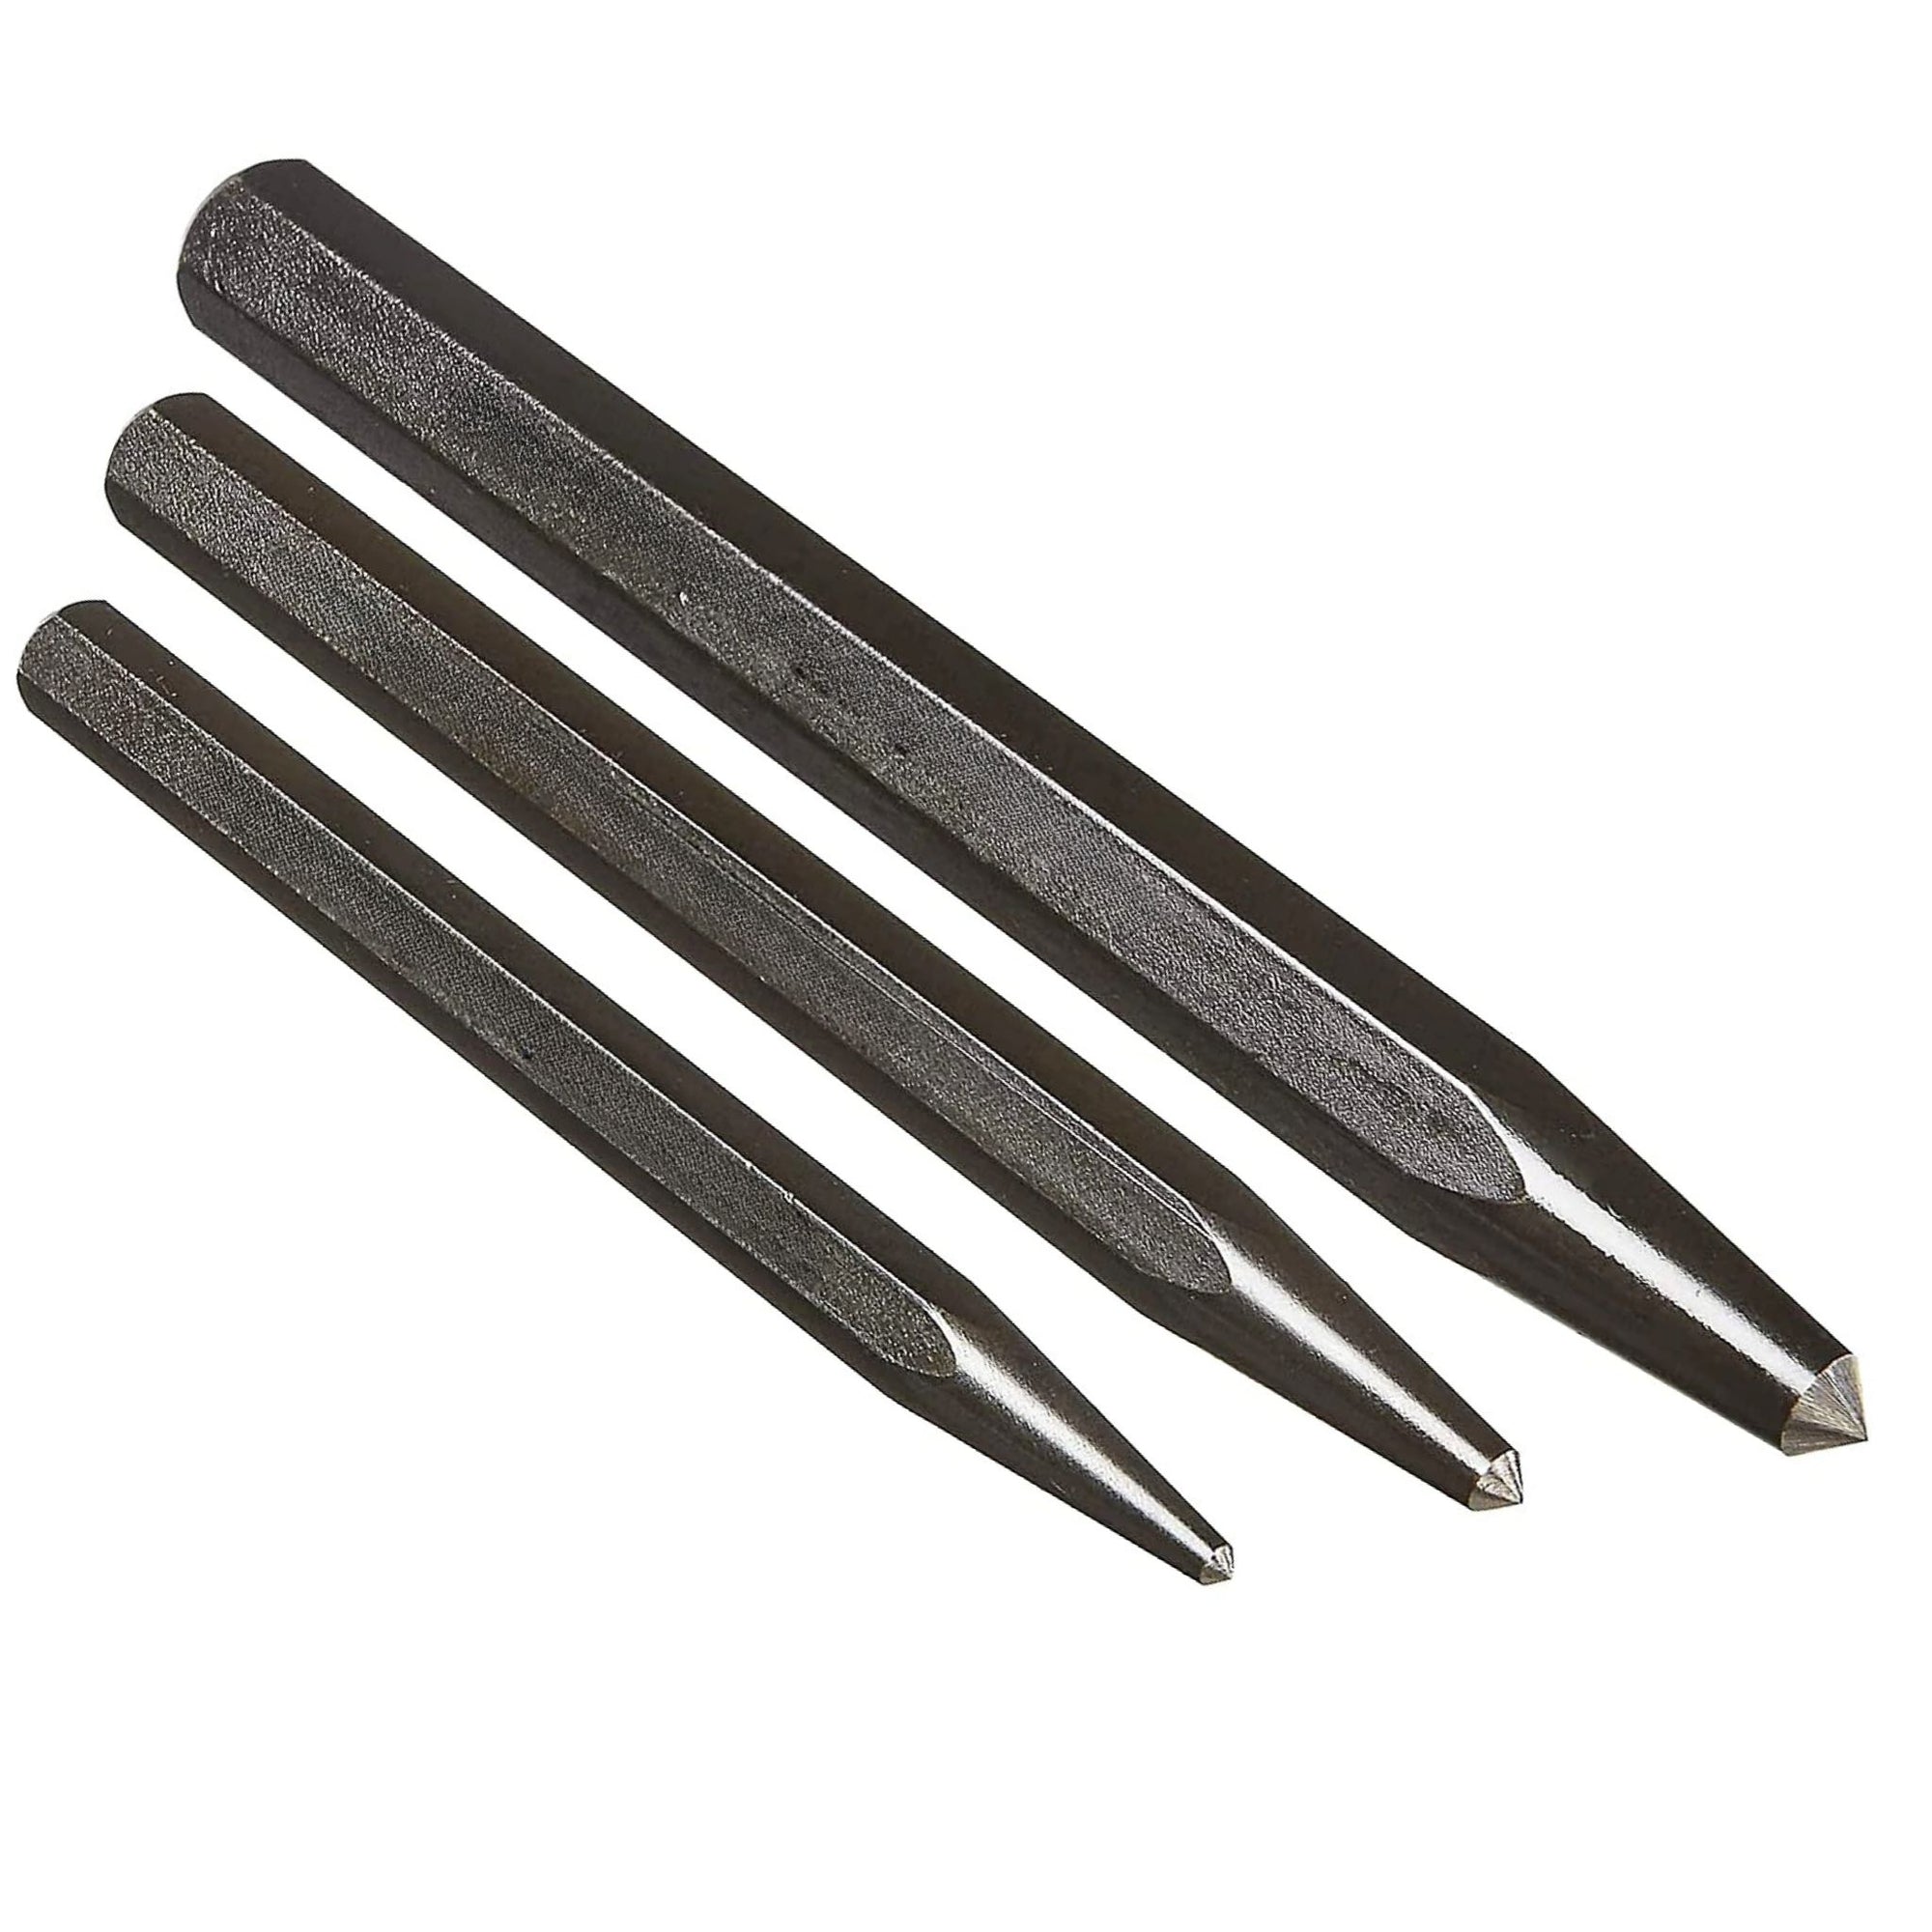 Center Punch Kit | 6.3mm, 5.4mm, 8mm) - South East Clearance Centre